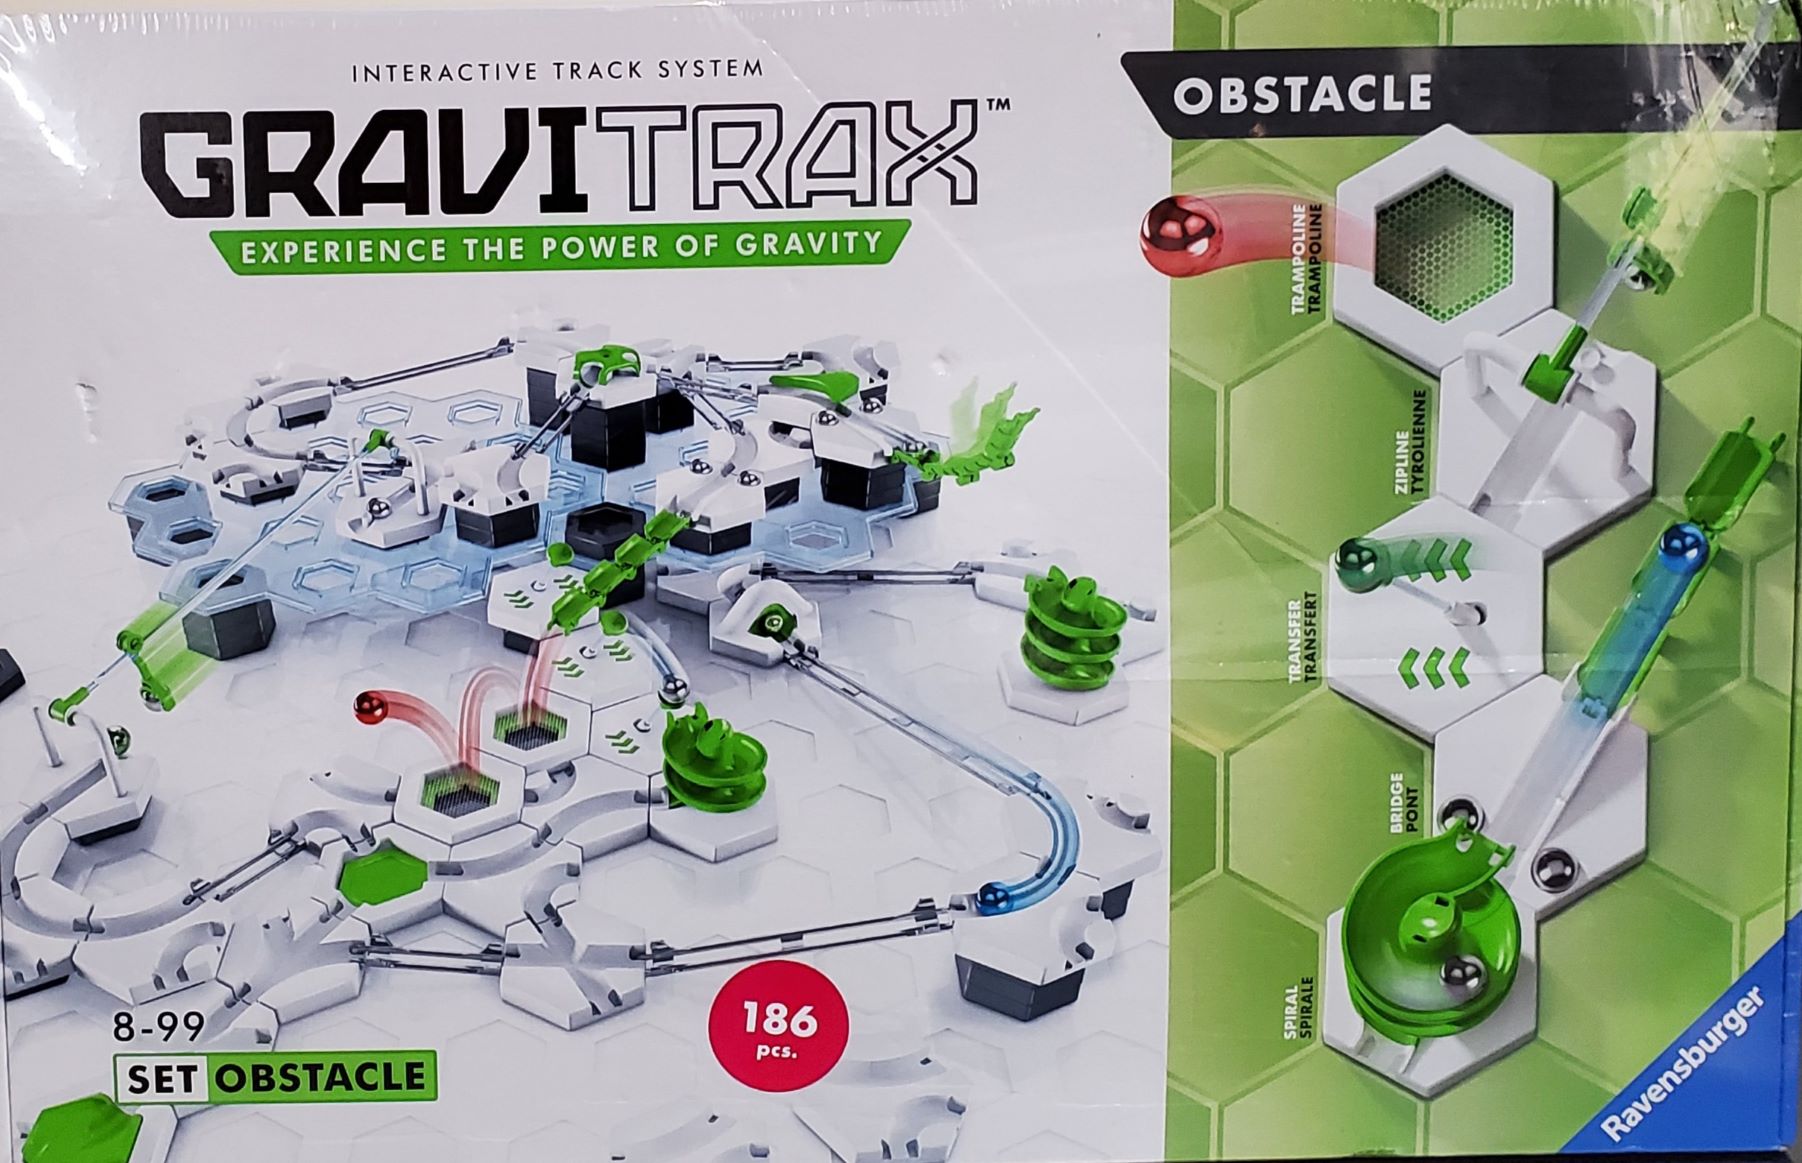 https://www.thepuzzlecollections.com/wp-content/uploads/2021/10/ravensburger-gravitrax-obstacle-set-2.jpg